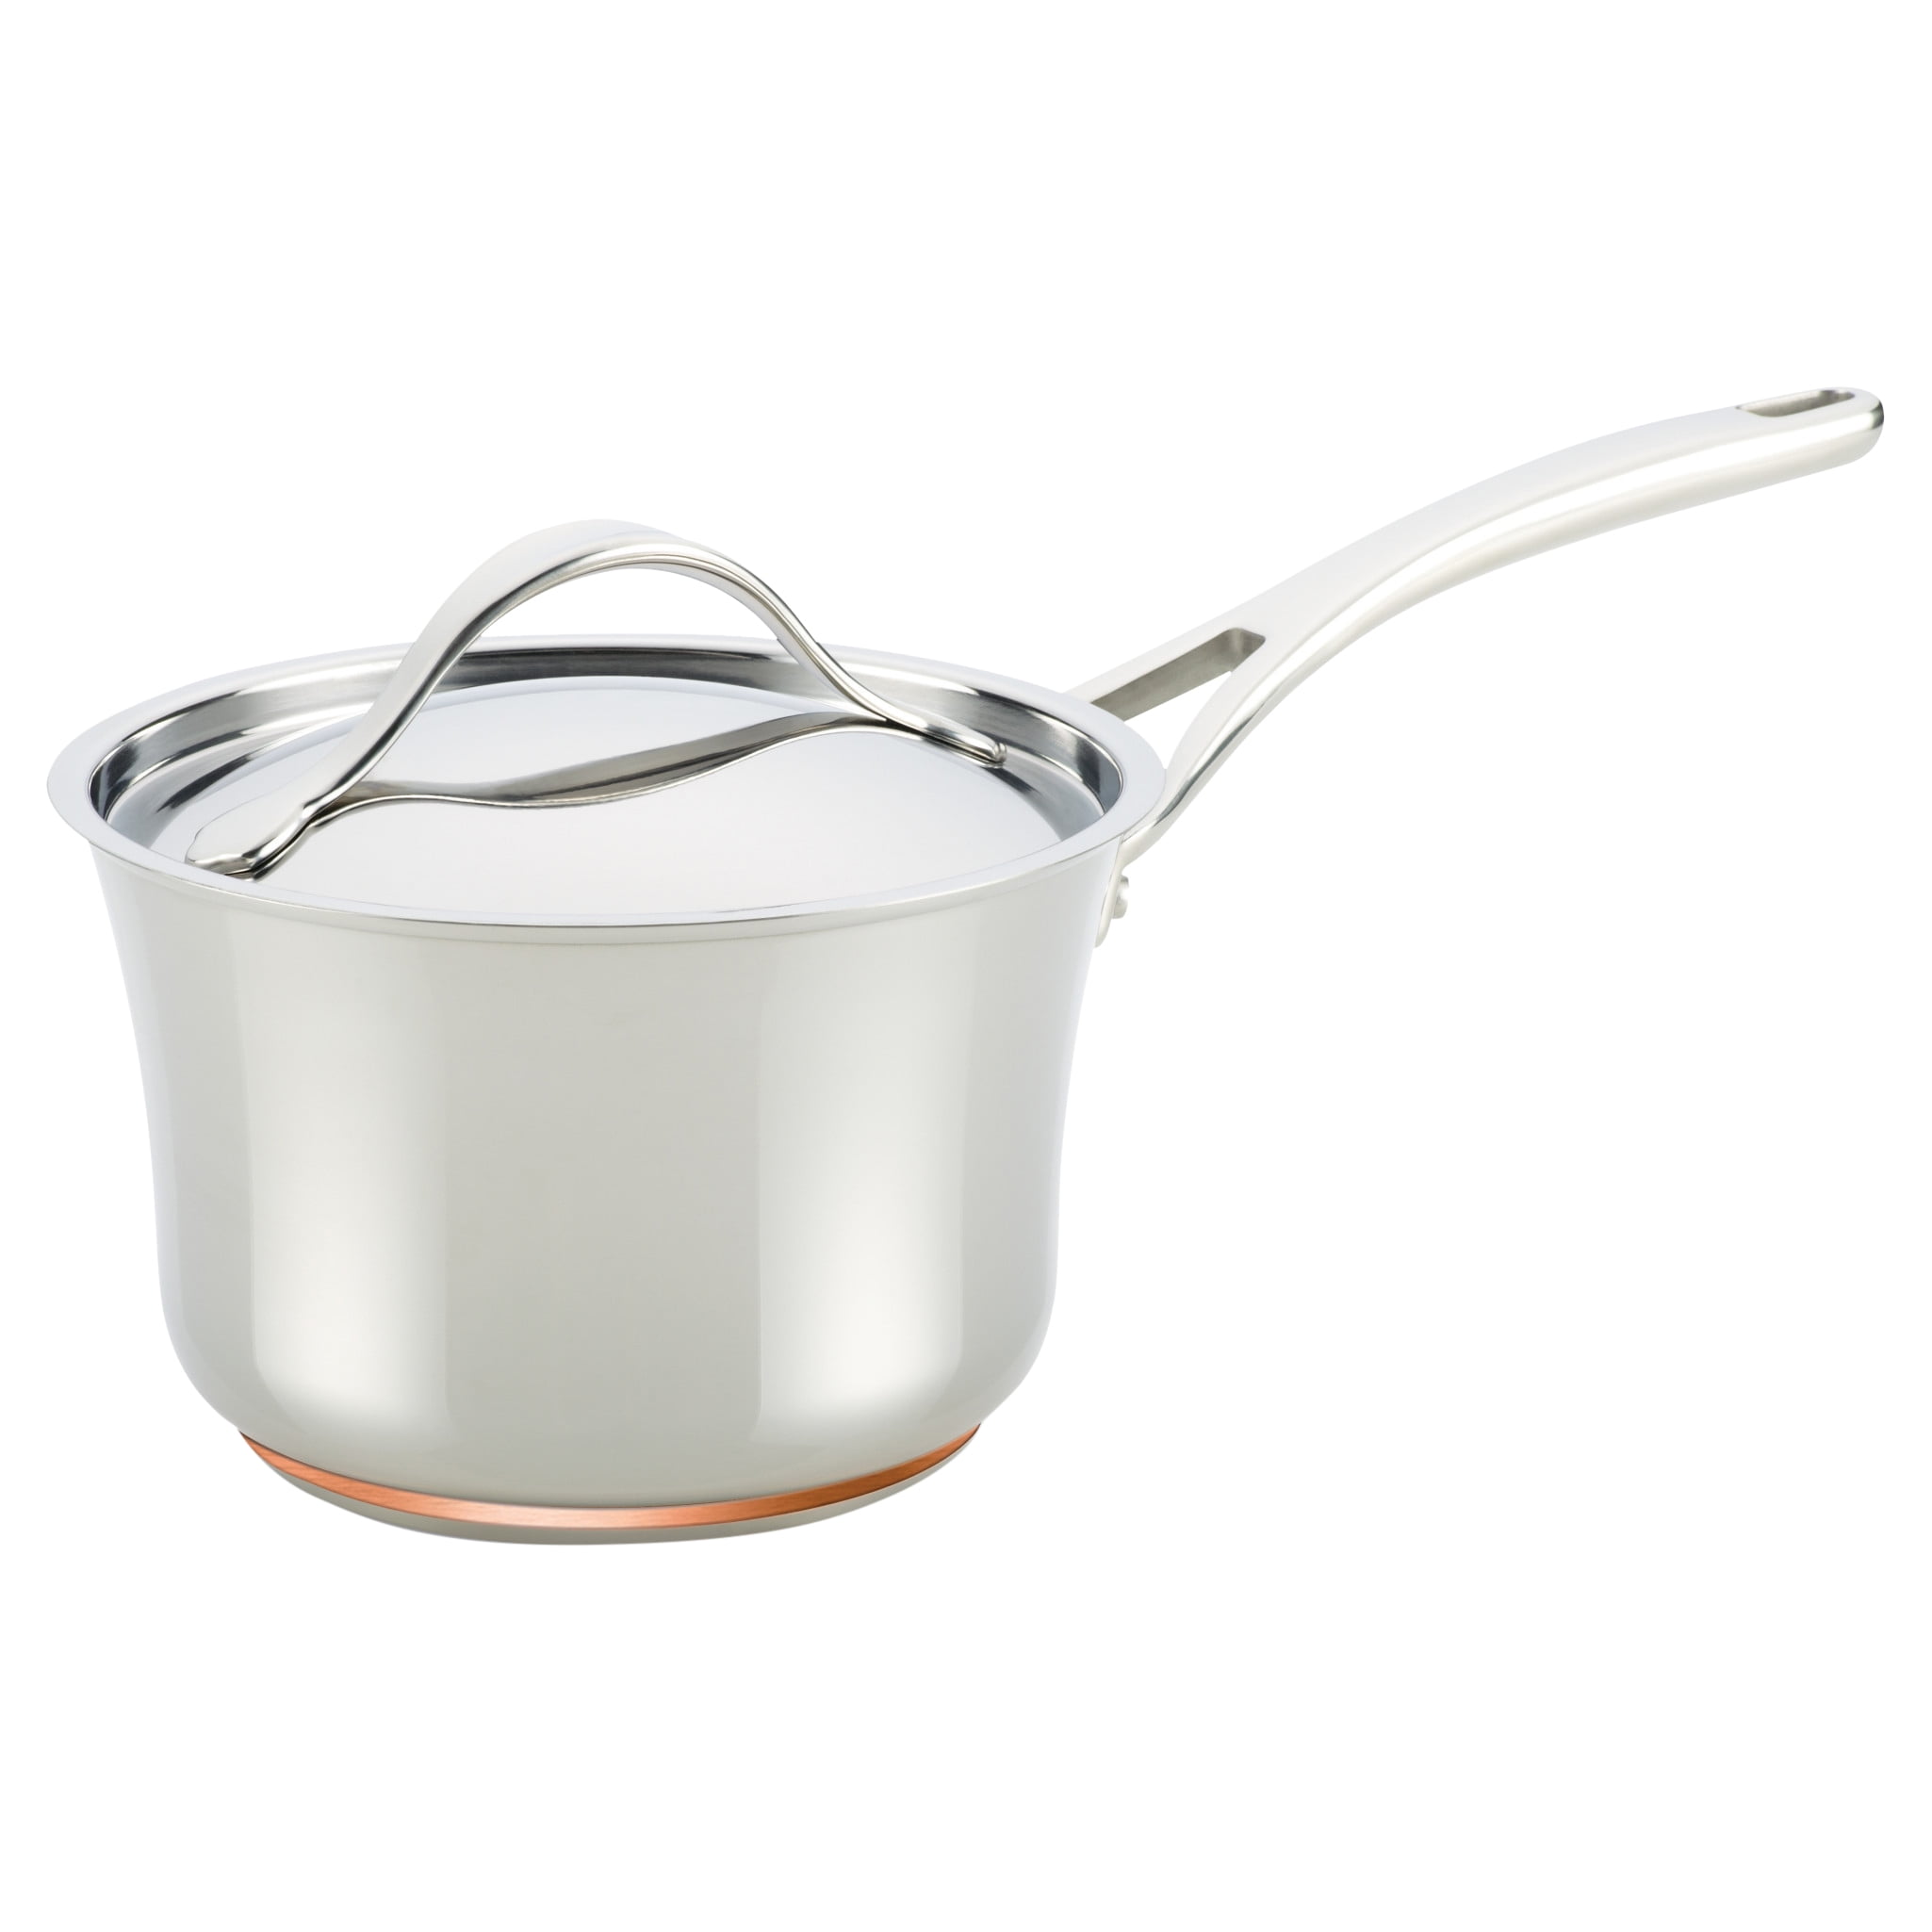 All-Clad Copper Core 2-qt Saucepan with lid and Porcelain Double